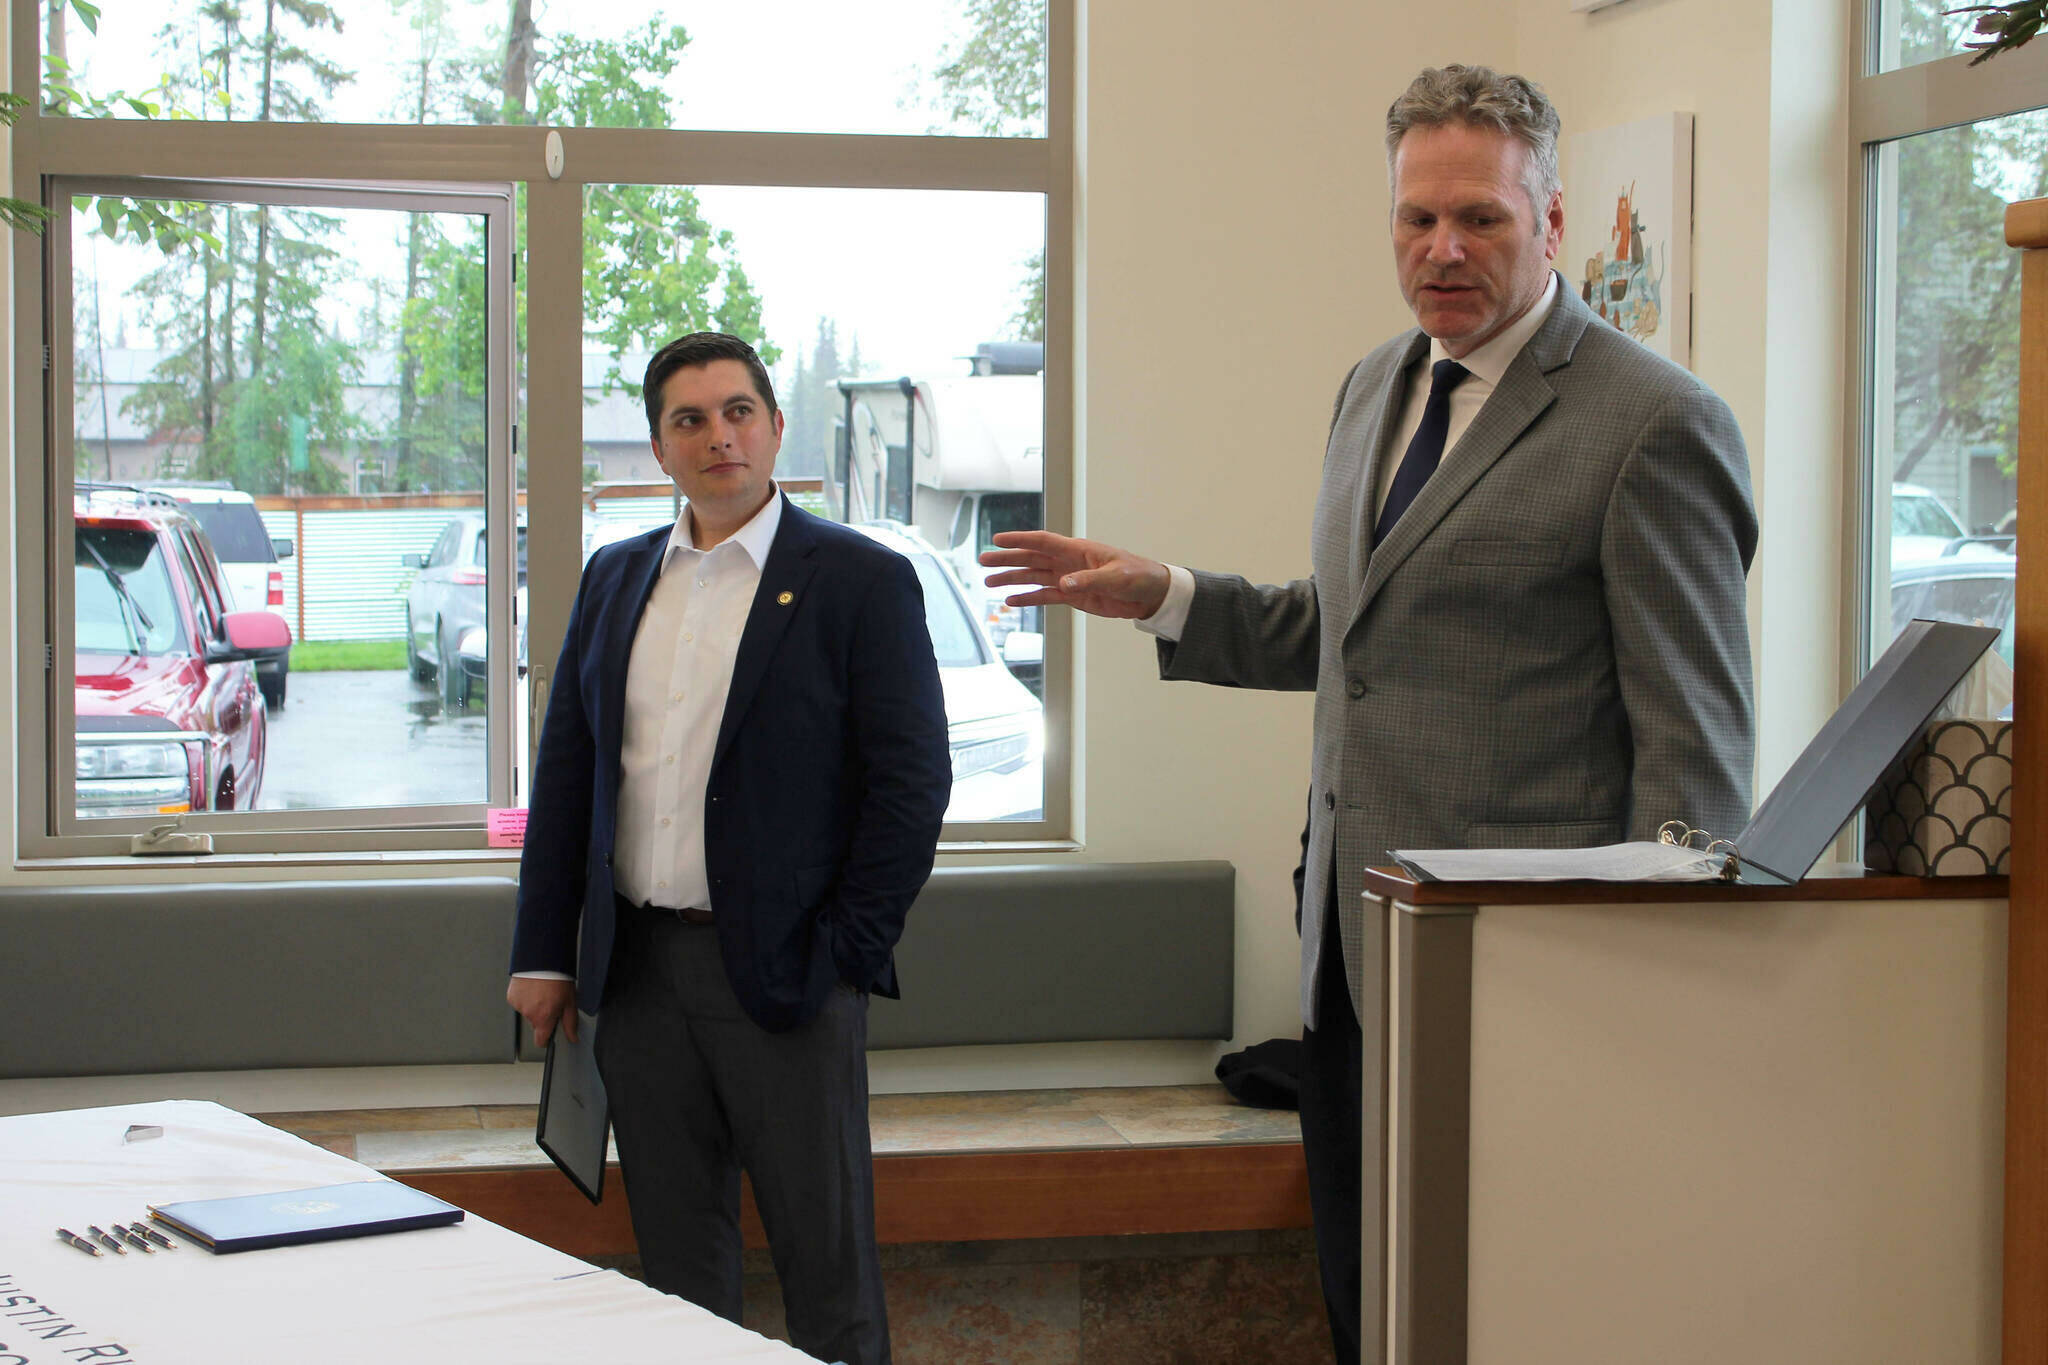 Gov. Mike Dunleavy (right) delivers opening remarks at a bill signing event at Twin Cities Veterinary Clinic on Thursday in Soldotna. (Ashlyn O’Hara/Peninsula Clarion)